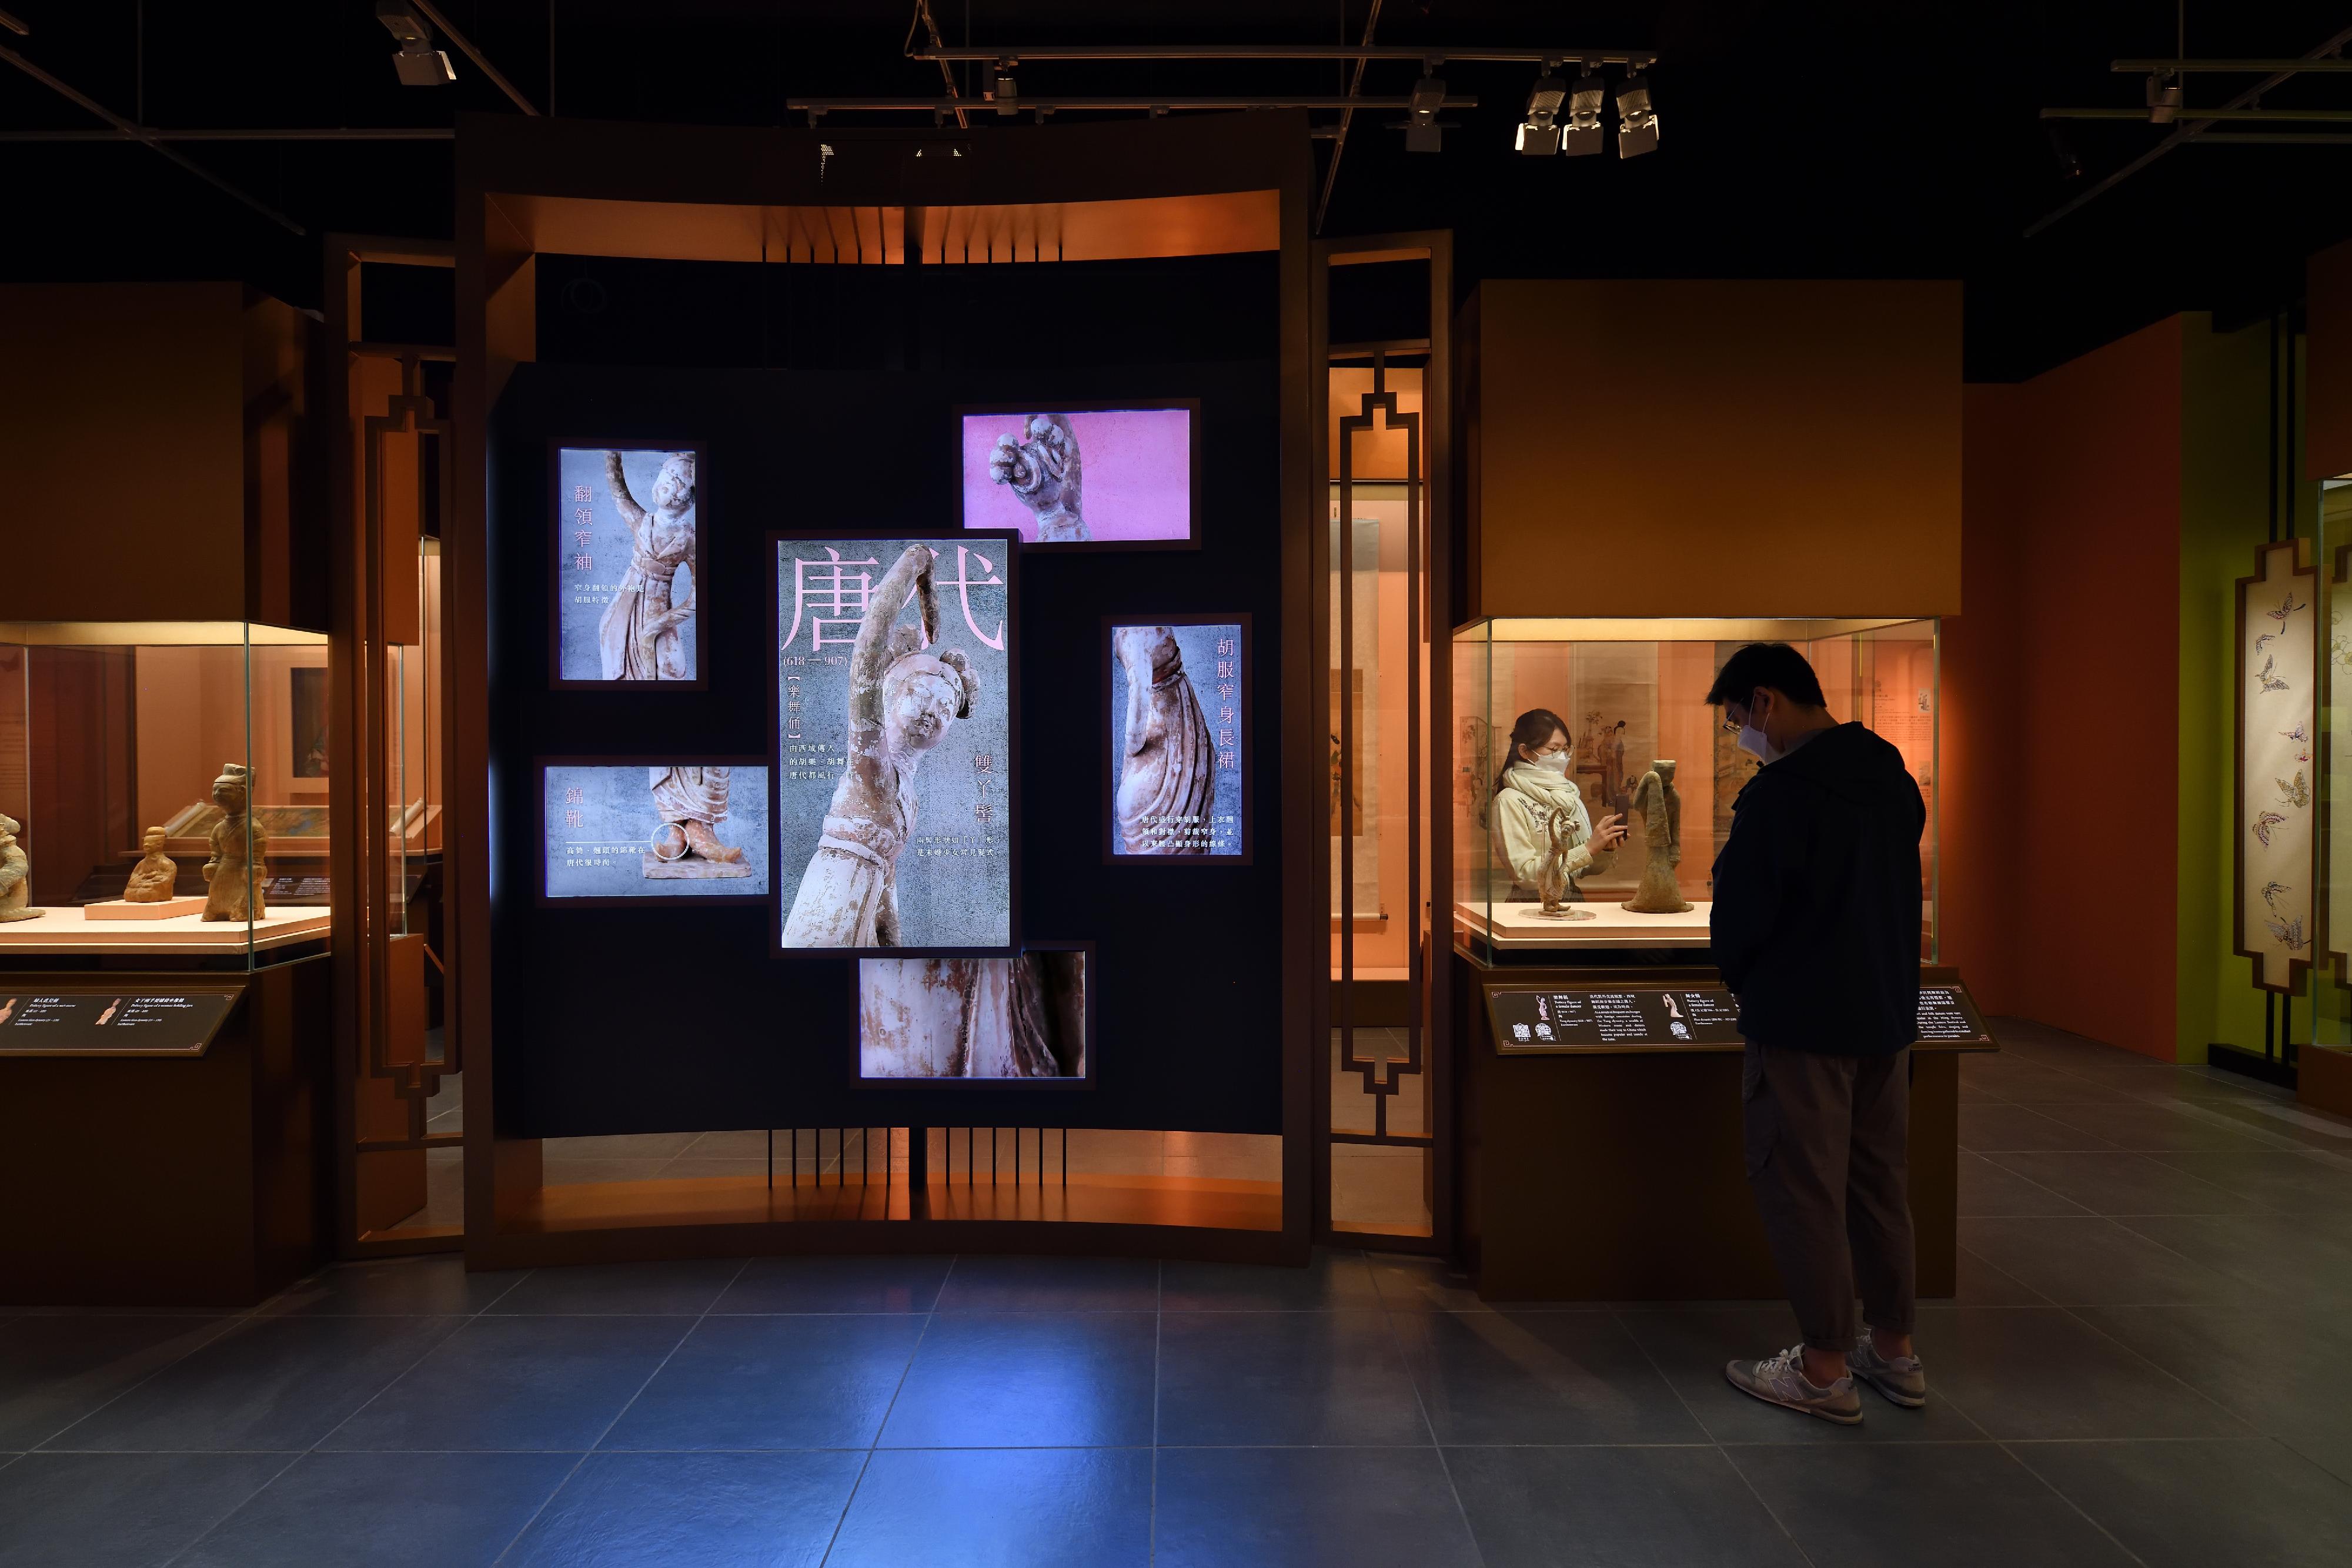 "The Hong Kong Jockey Club Series: Women and Femininity in Ancient China - Treasures from the Nanjing Museum" exhibition being held at the Hong Kong Heritage Museum will end on February 27 (Monday). Picture shows the digital display at the exhibition gallery showing the details of the pottery figure of a female dancer in the Tang dynasty.